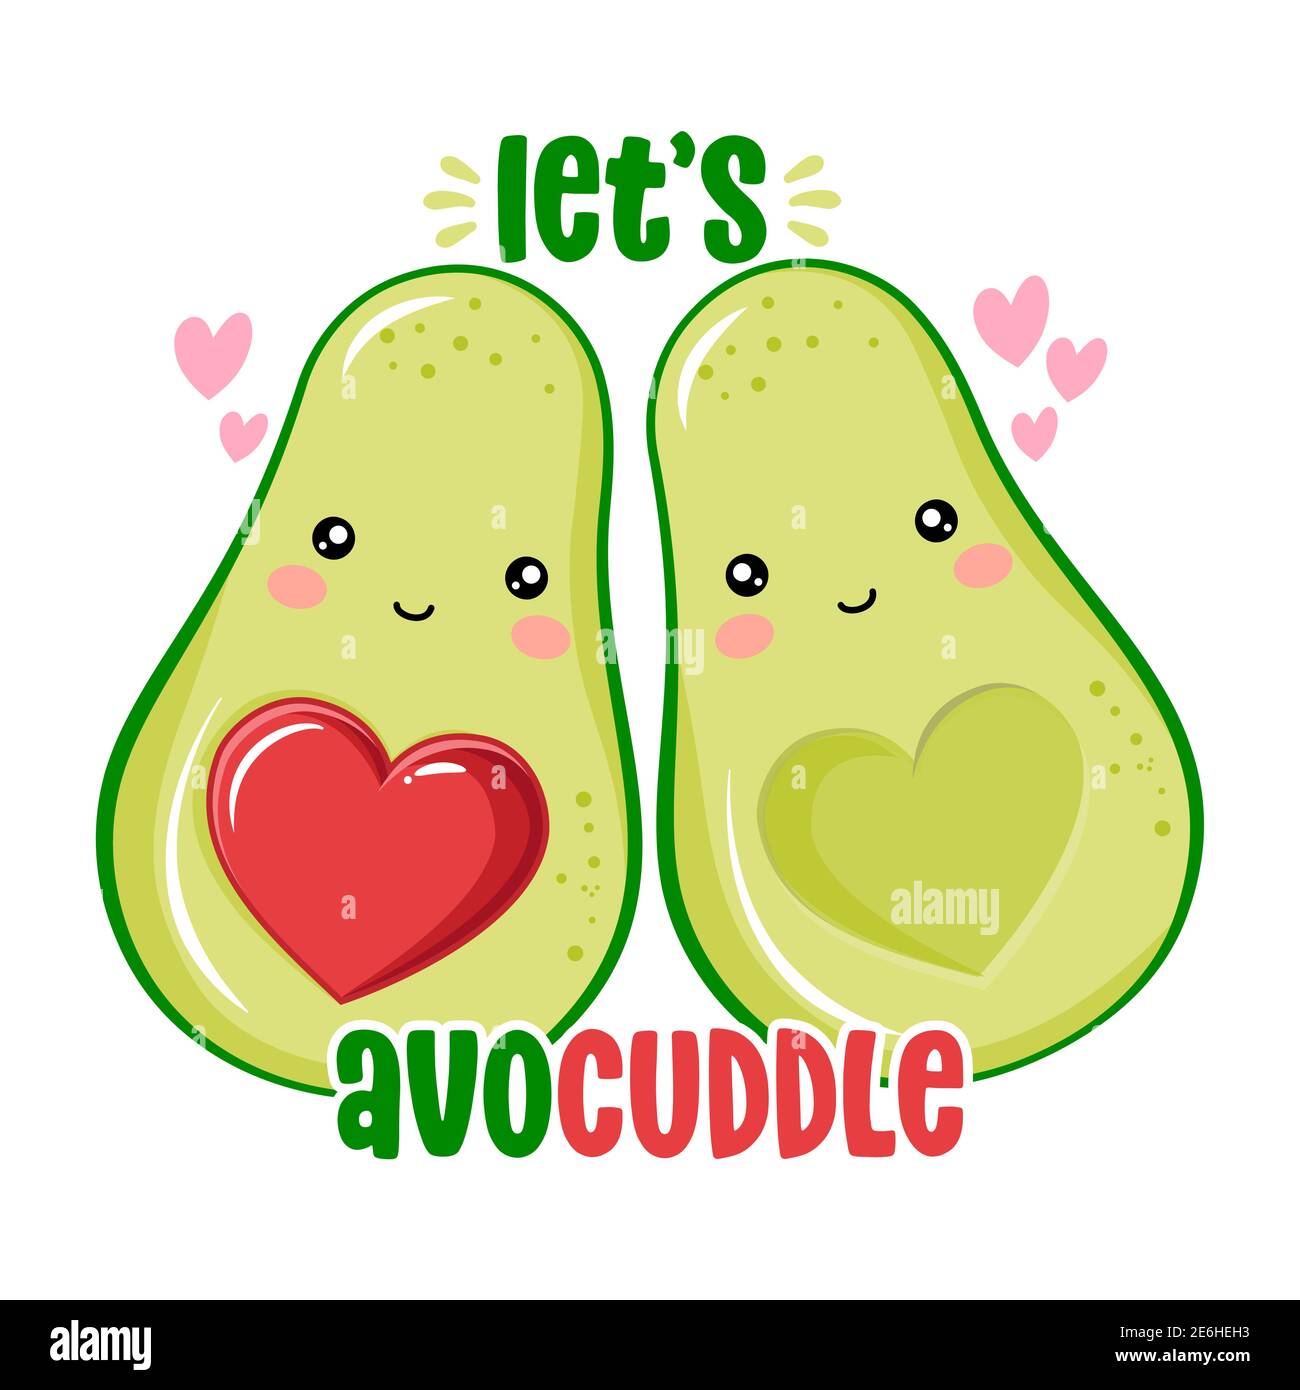 Let\'s Avo Cuddle & Good cards, kawaii banners Art Stock for hand greeting avocado drawn illustration Valentine\'s style. - Day Vector couple Alamy Image - Cute color poster. posters